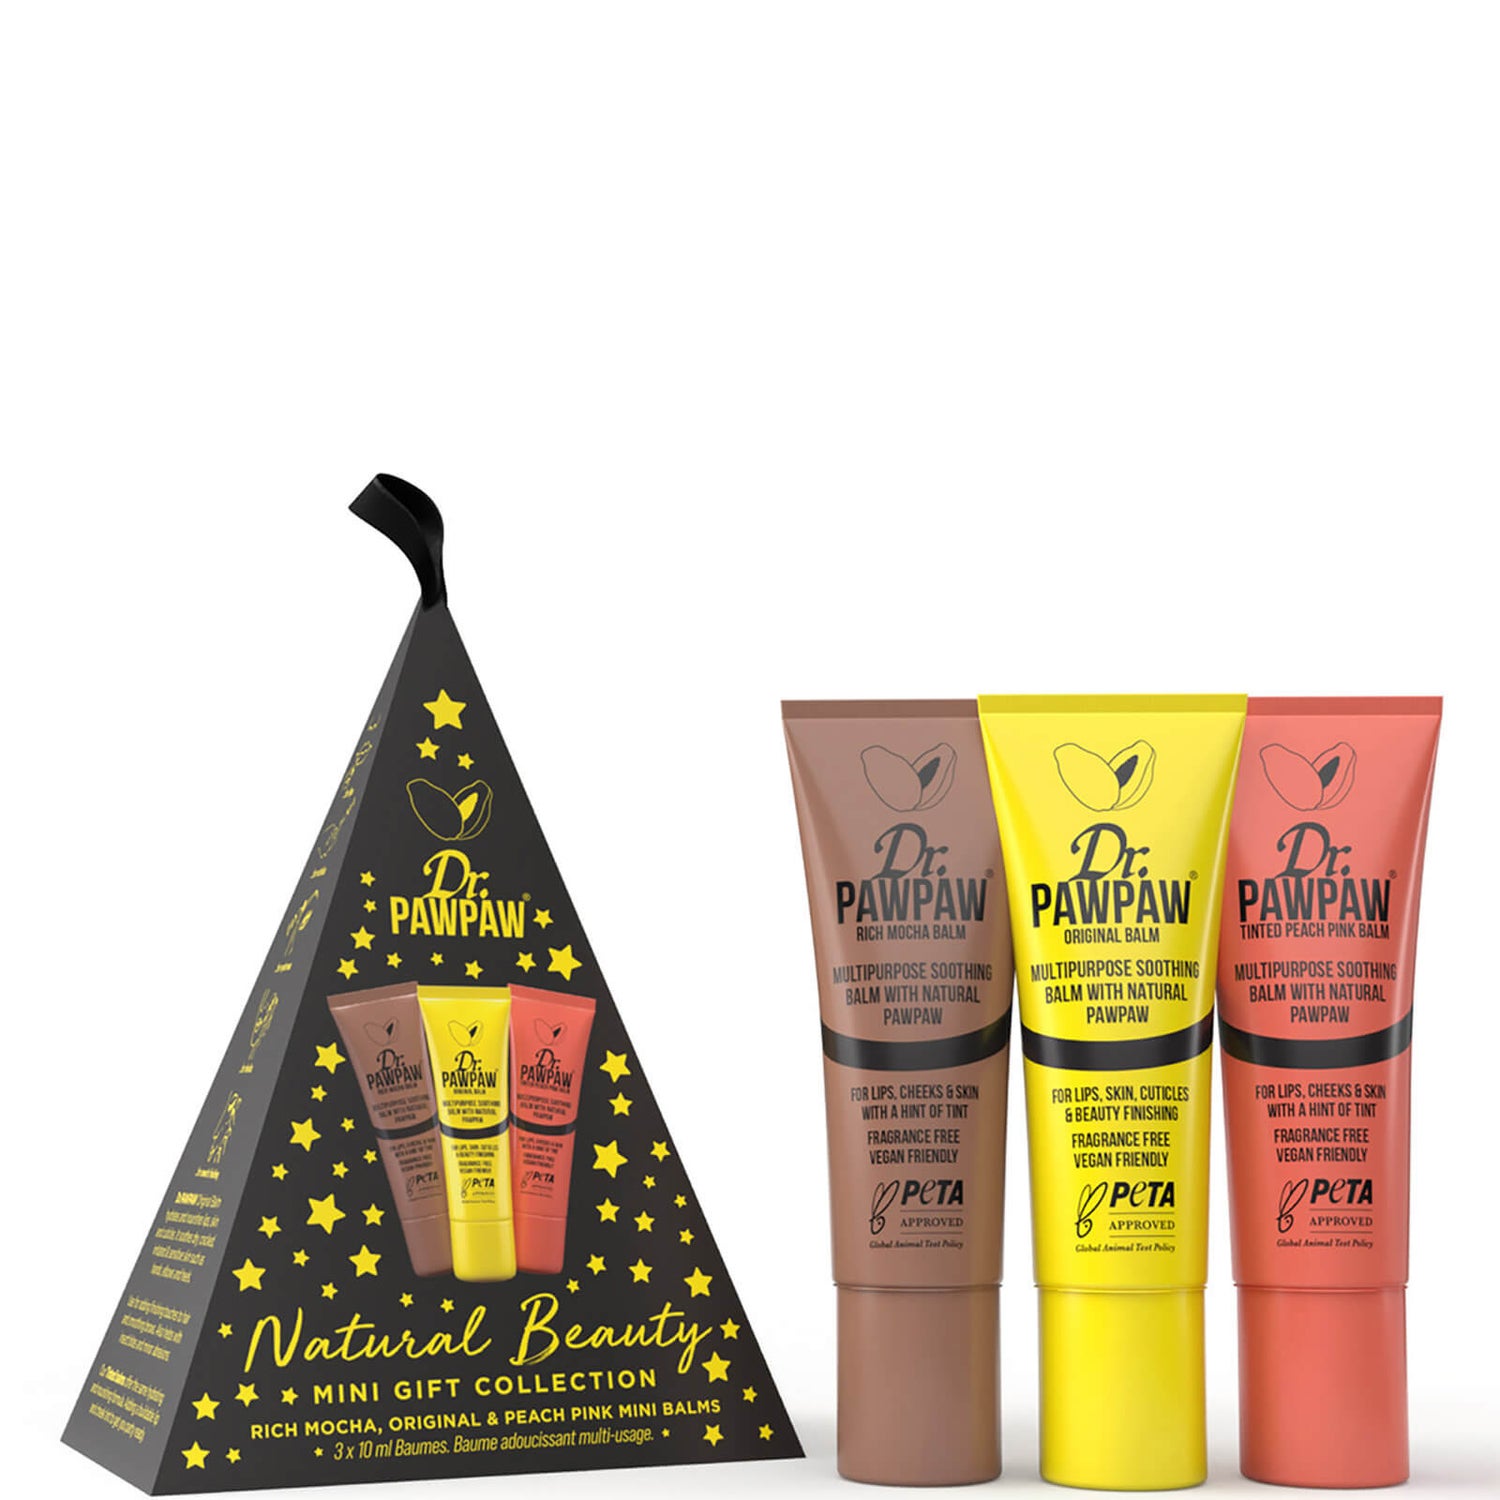 Dr. PAWPAW Christmas Mini Natural Beauty Gift Collection (Worth £11.85)